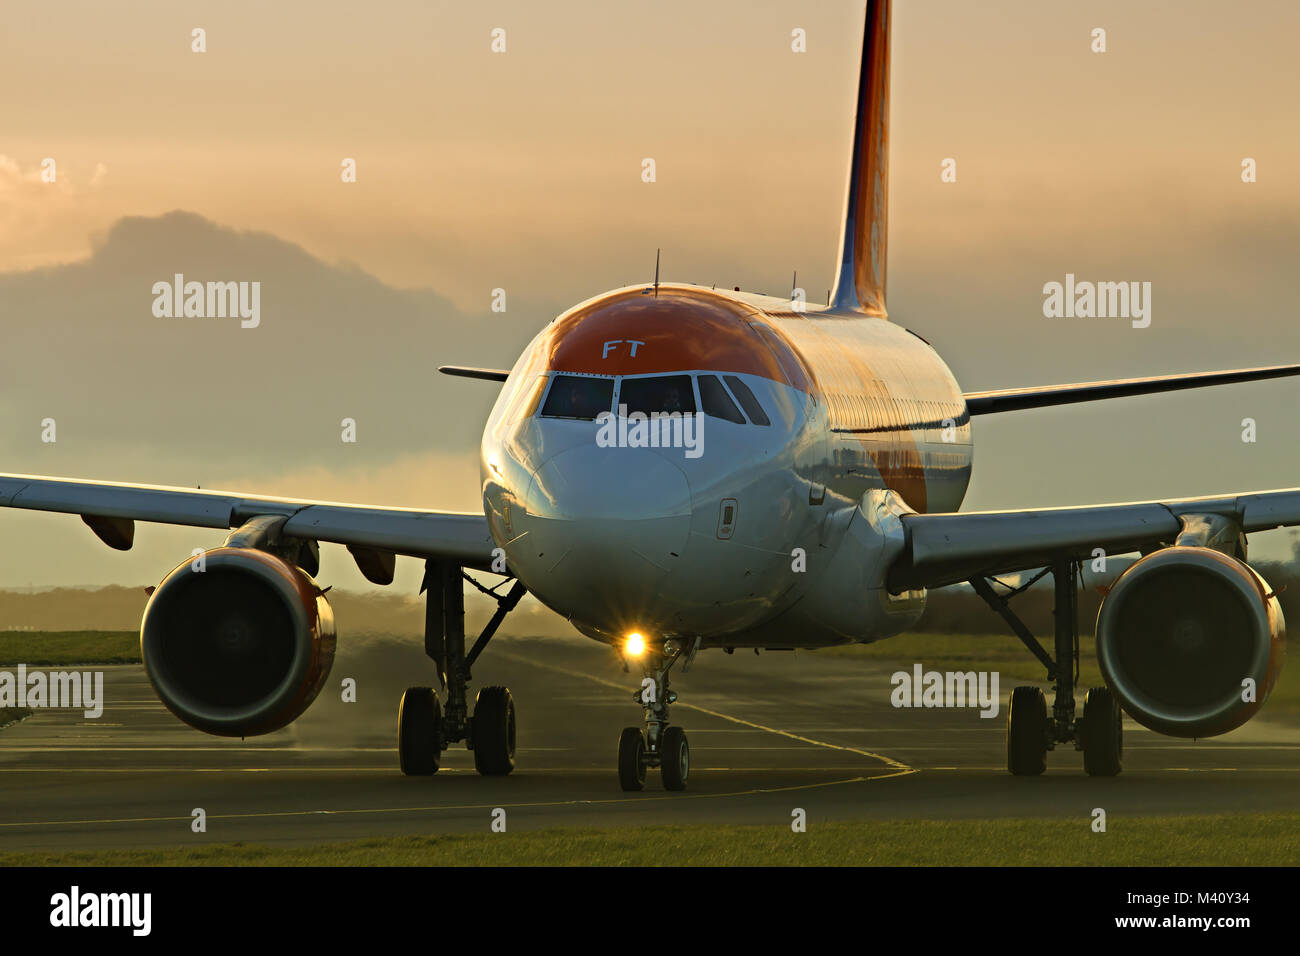 An Easyjet passenger plane taxiing out to the runway for take off at Liverpool John Lennon Airport at dusk. Stock Photo